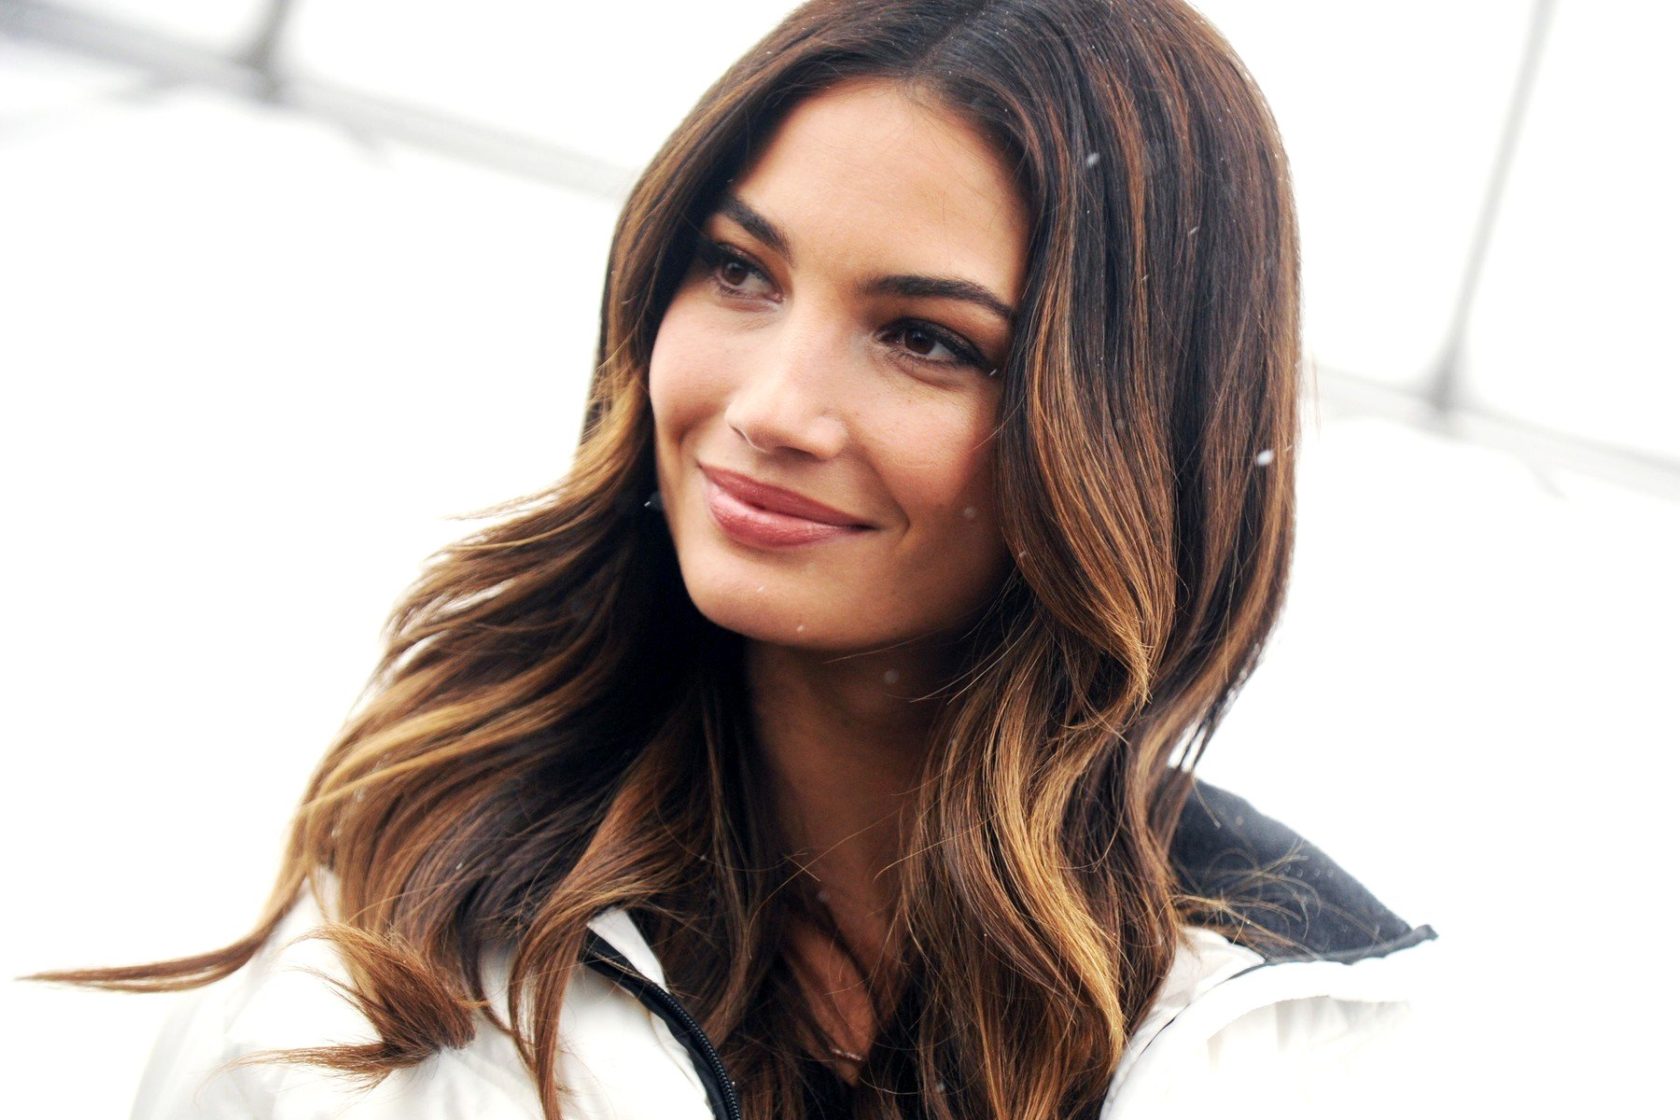 Dec. 10, 2013 - New York, New York, USA - Photocall with Lily Aldridge at the Empire State Building to celebrate the airing of the 2013 Victoria's Secret Fashion Show on CBS. New York, 10.12.2013, Image: 179569843, License: Rights-managed, Restrictions: , Model Release: no, Credit line: Profimedia, Zuma Press - Archives